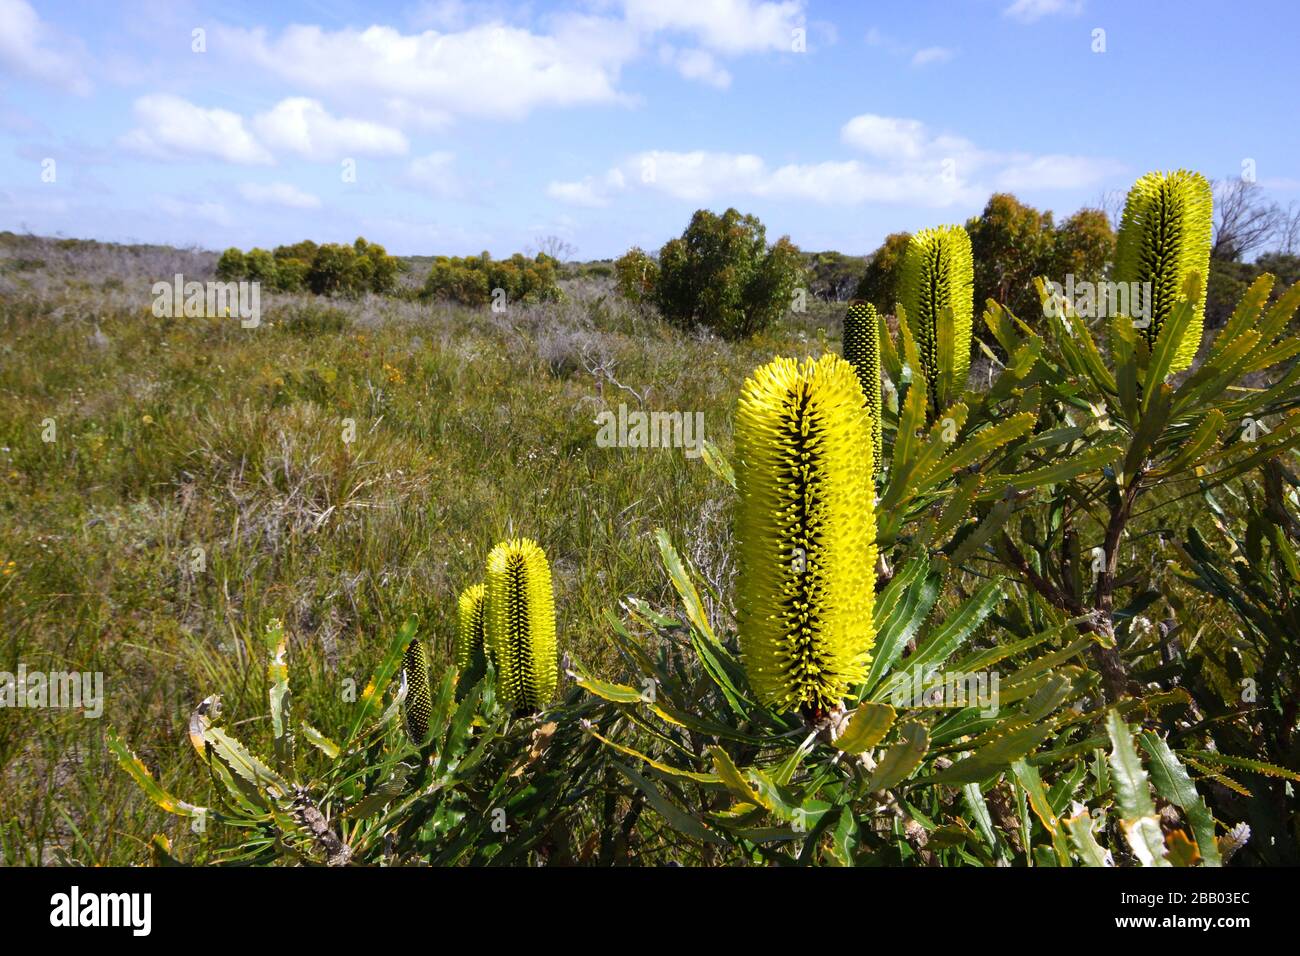 Candlestick Banksia shrub, Banksia attenuata, with yellow flowers, native to South West Western Australia in its natural habitat Stock Photo